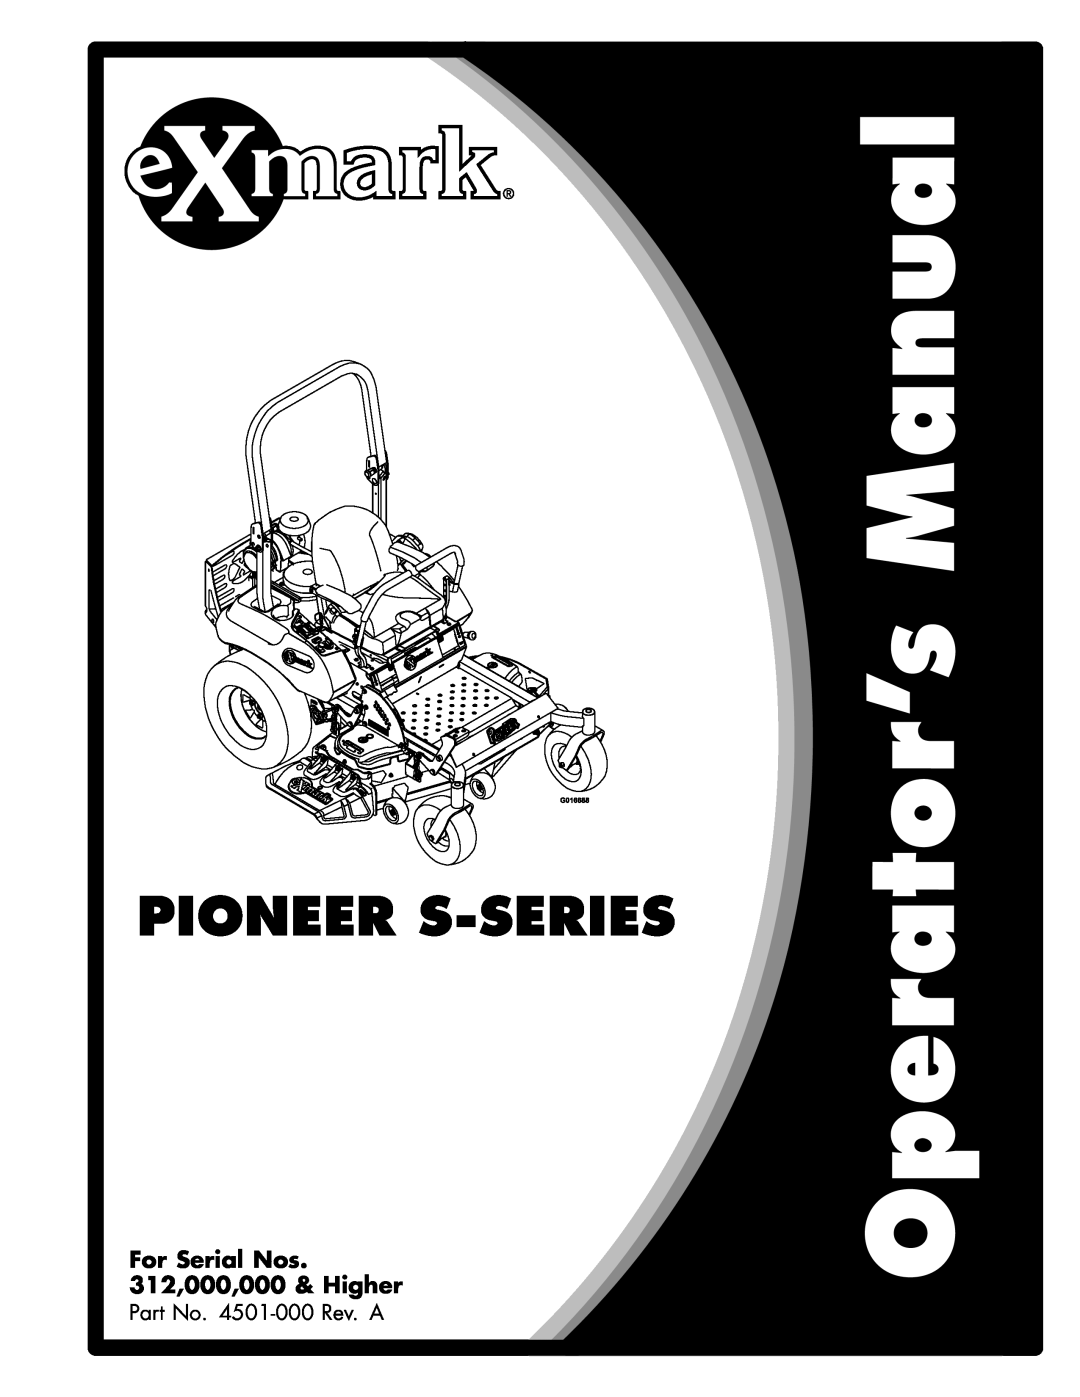 Exmark 000 & higher manual Pioneer S-Series, For Serial Nos 312,000,000 & Higher, Part No. 4501-000Rev. A 